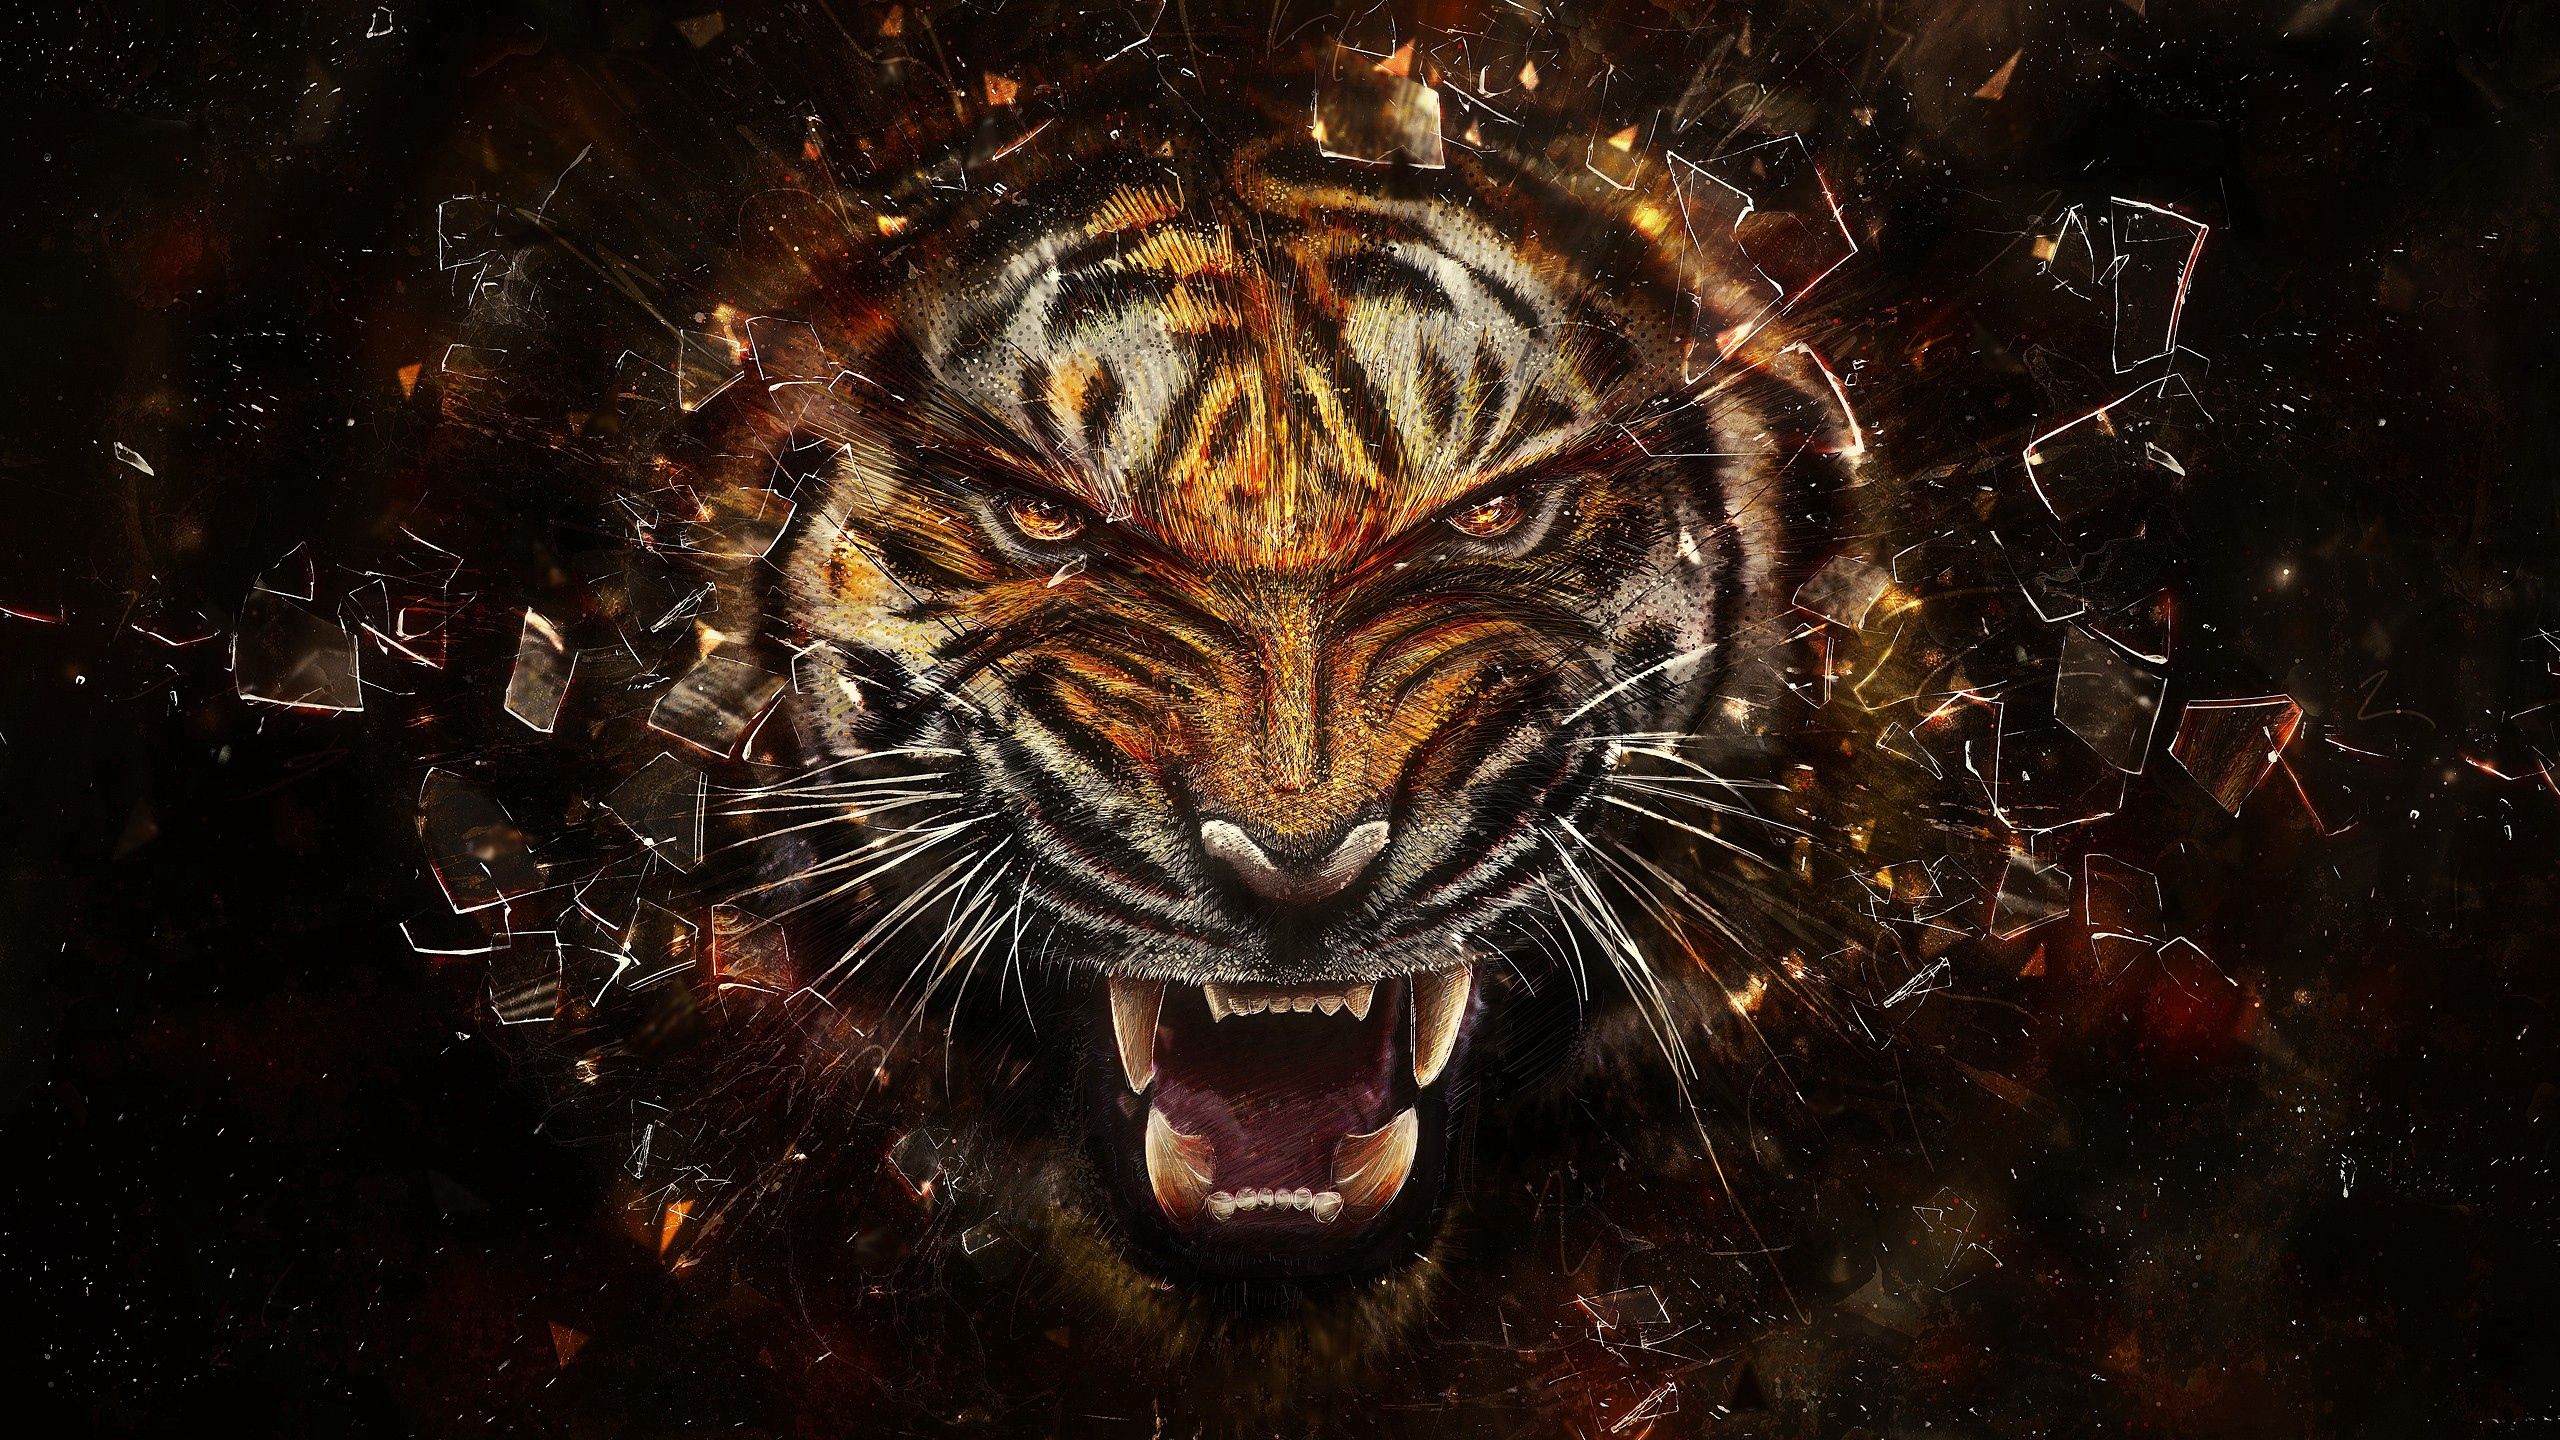 HD wallpaper smithereens, tiger, abstract, aggression, grin, glass, shards